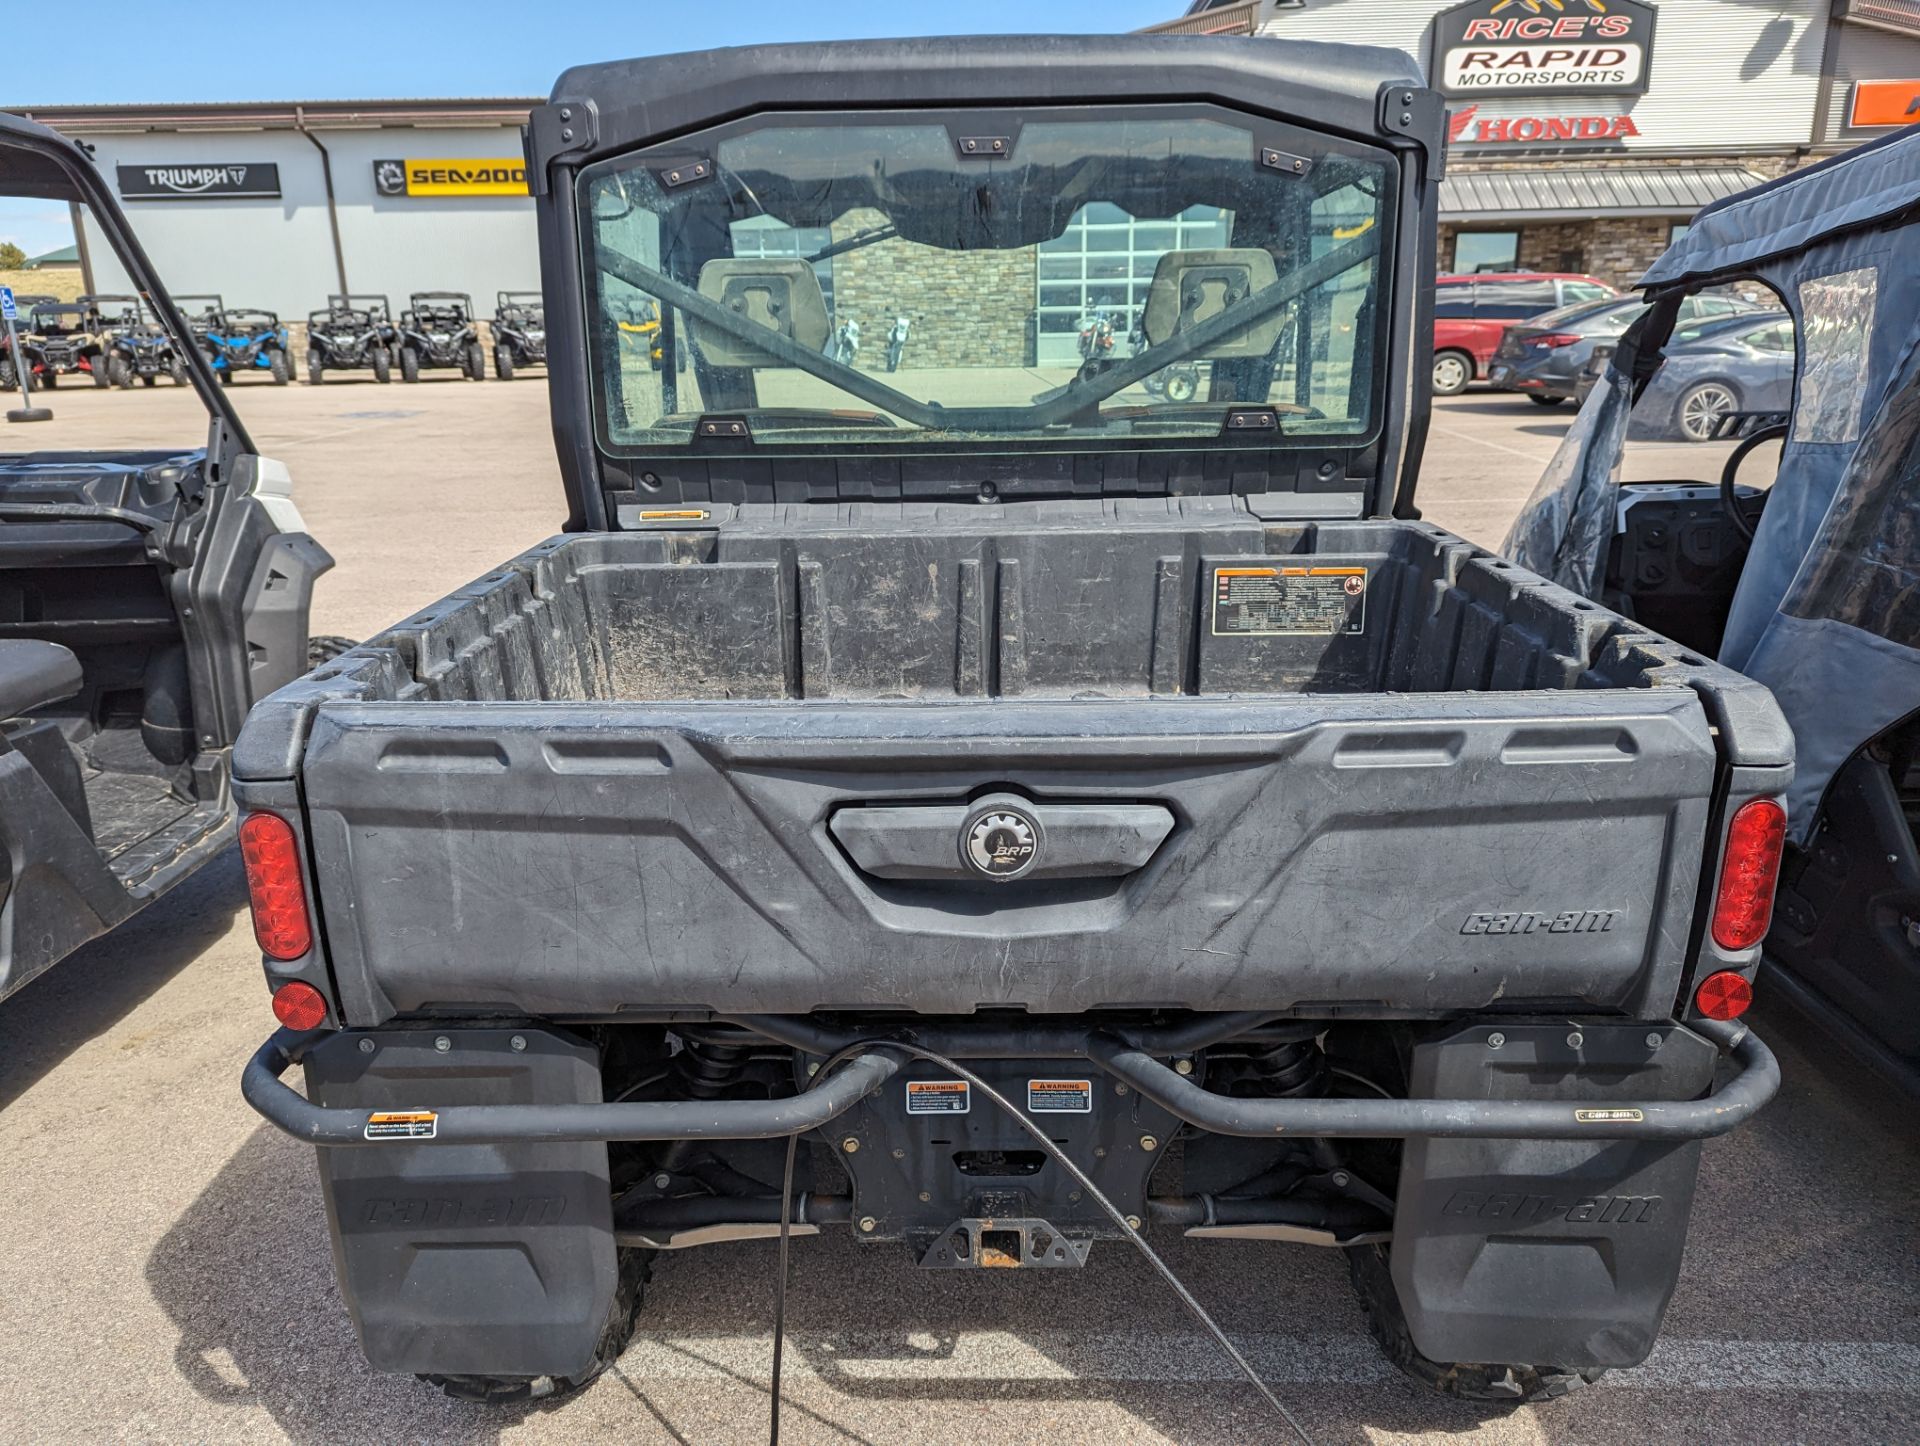 2021 Can-Am Defender Limited HD10 in Rapid City, South Dakota - Photo 5